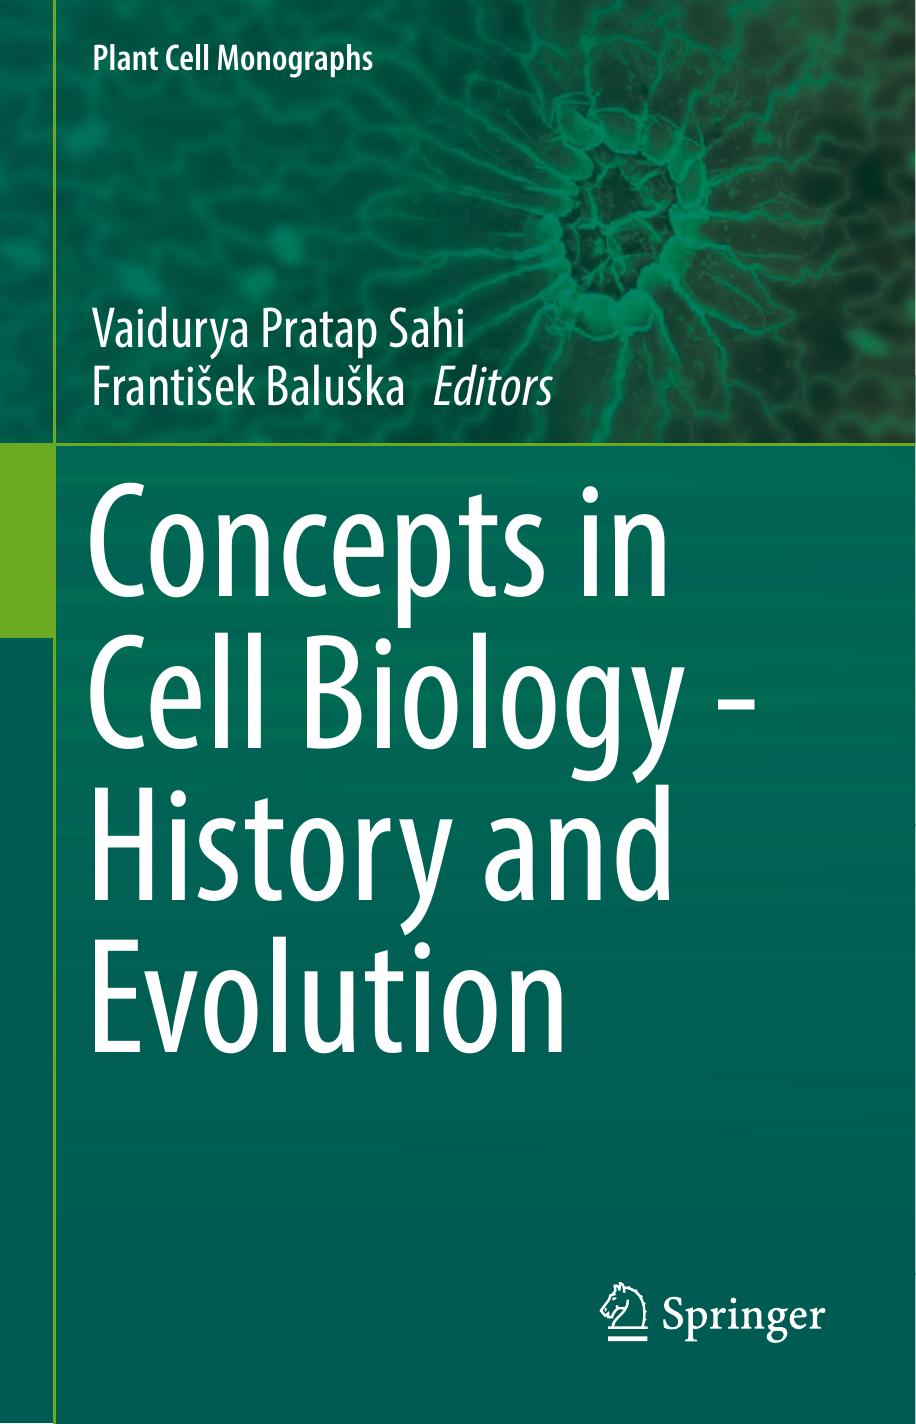 Concepts in Cell Biology